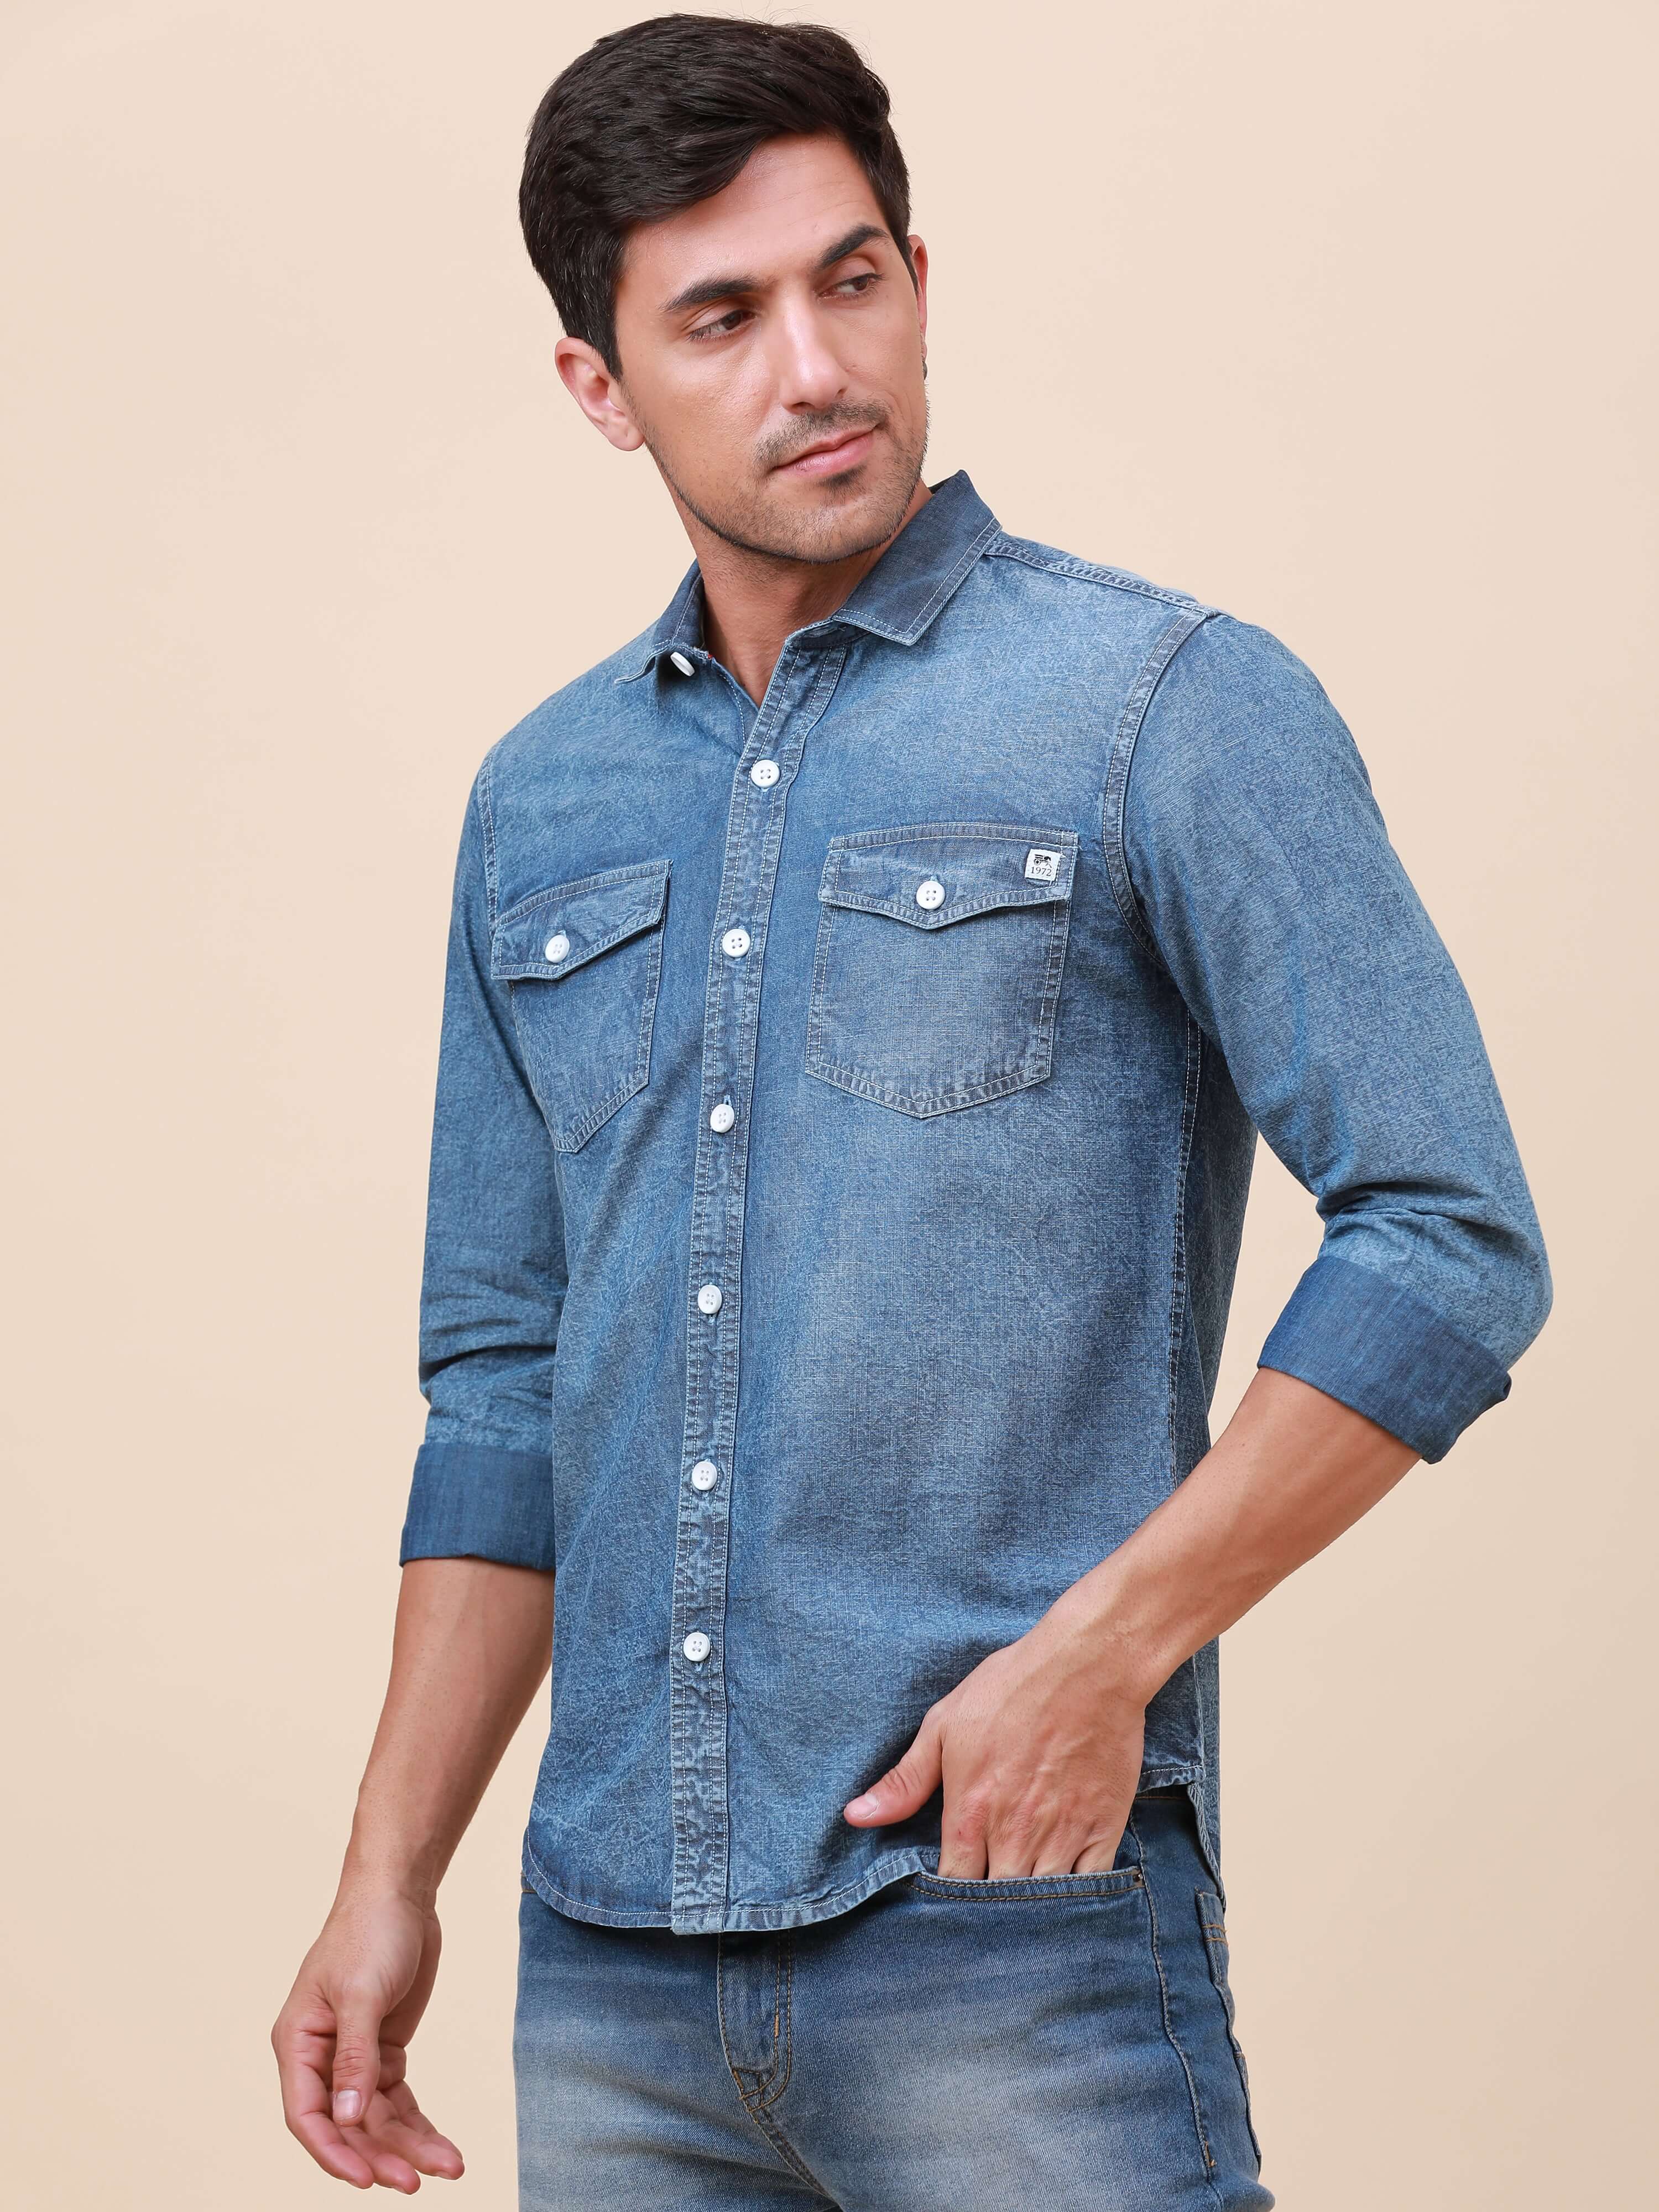 Denim Double Pocket Shirt shop online at Estilocus. Denim, Full-sleeve solid shirt Cut and sew placket Regular collar Double button edge cuff Double pocket with flap Curved bottom hemline All double needle construction, finest quality sewing Machine wash